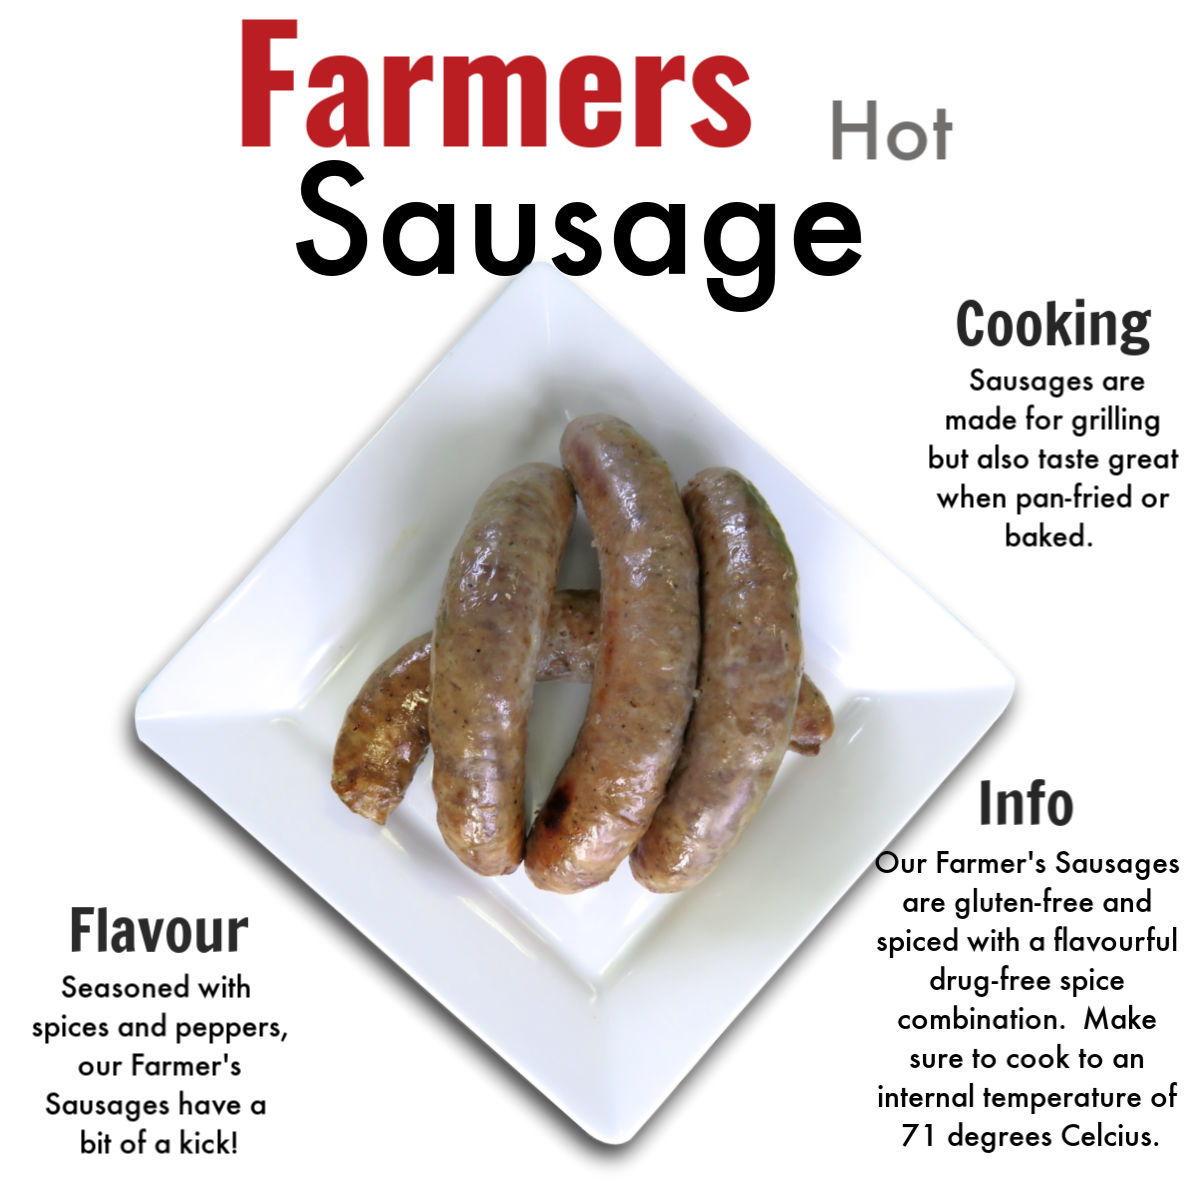 Recipes - 30 minute meals and organic recipes from Nutrafarms - Italian Sausage Sandwich